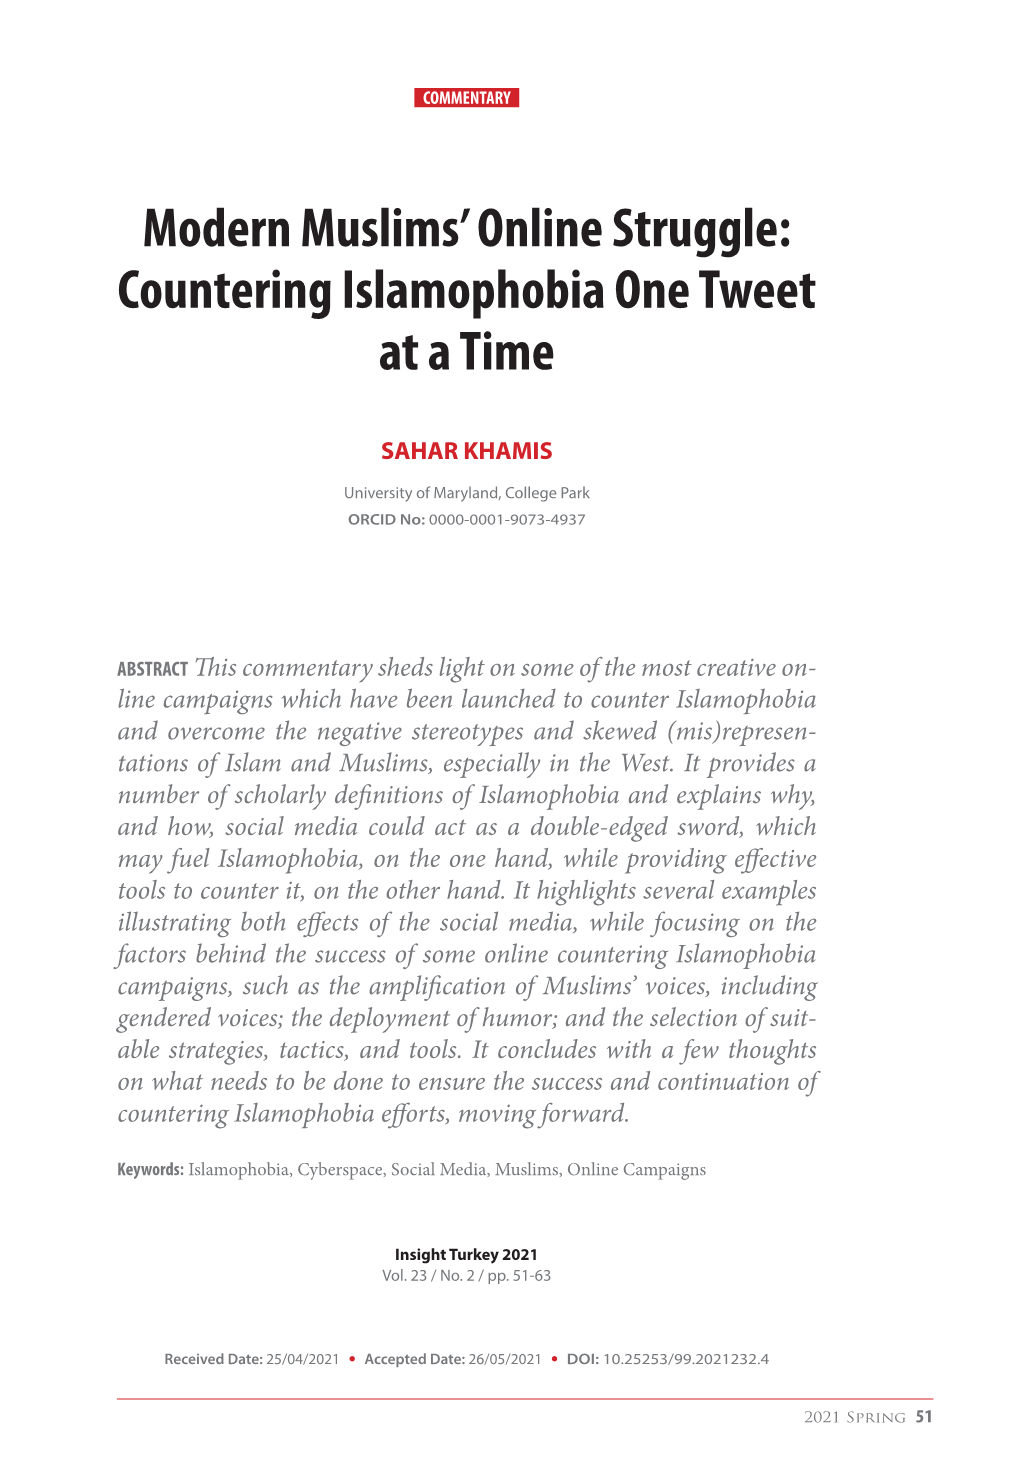 Modern Muslims' Online Struggle: Countering Islamophobia One Tweet at a Time